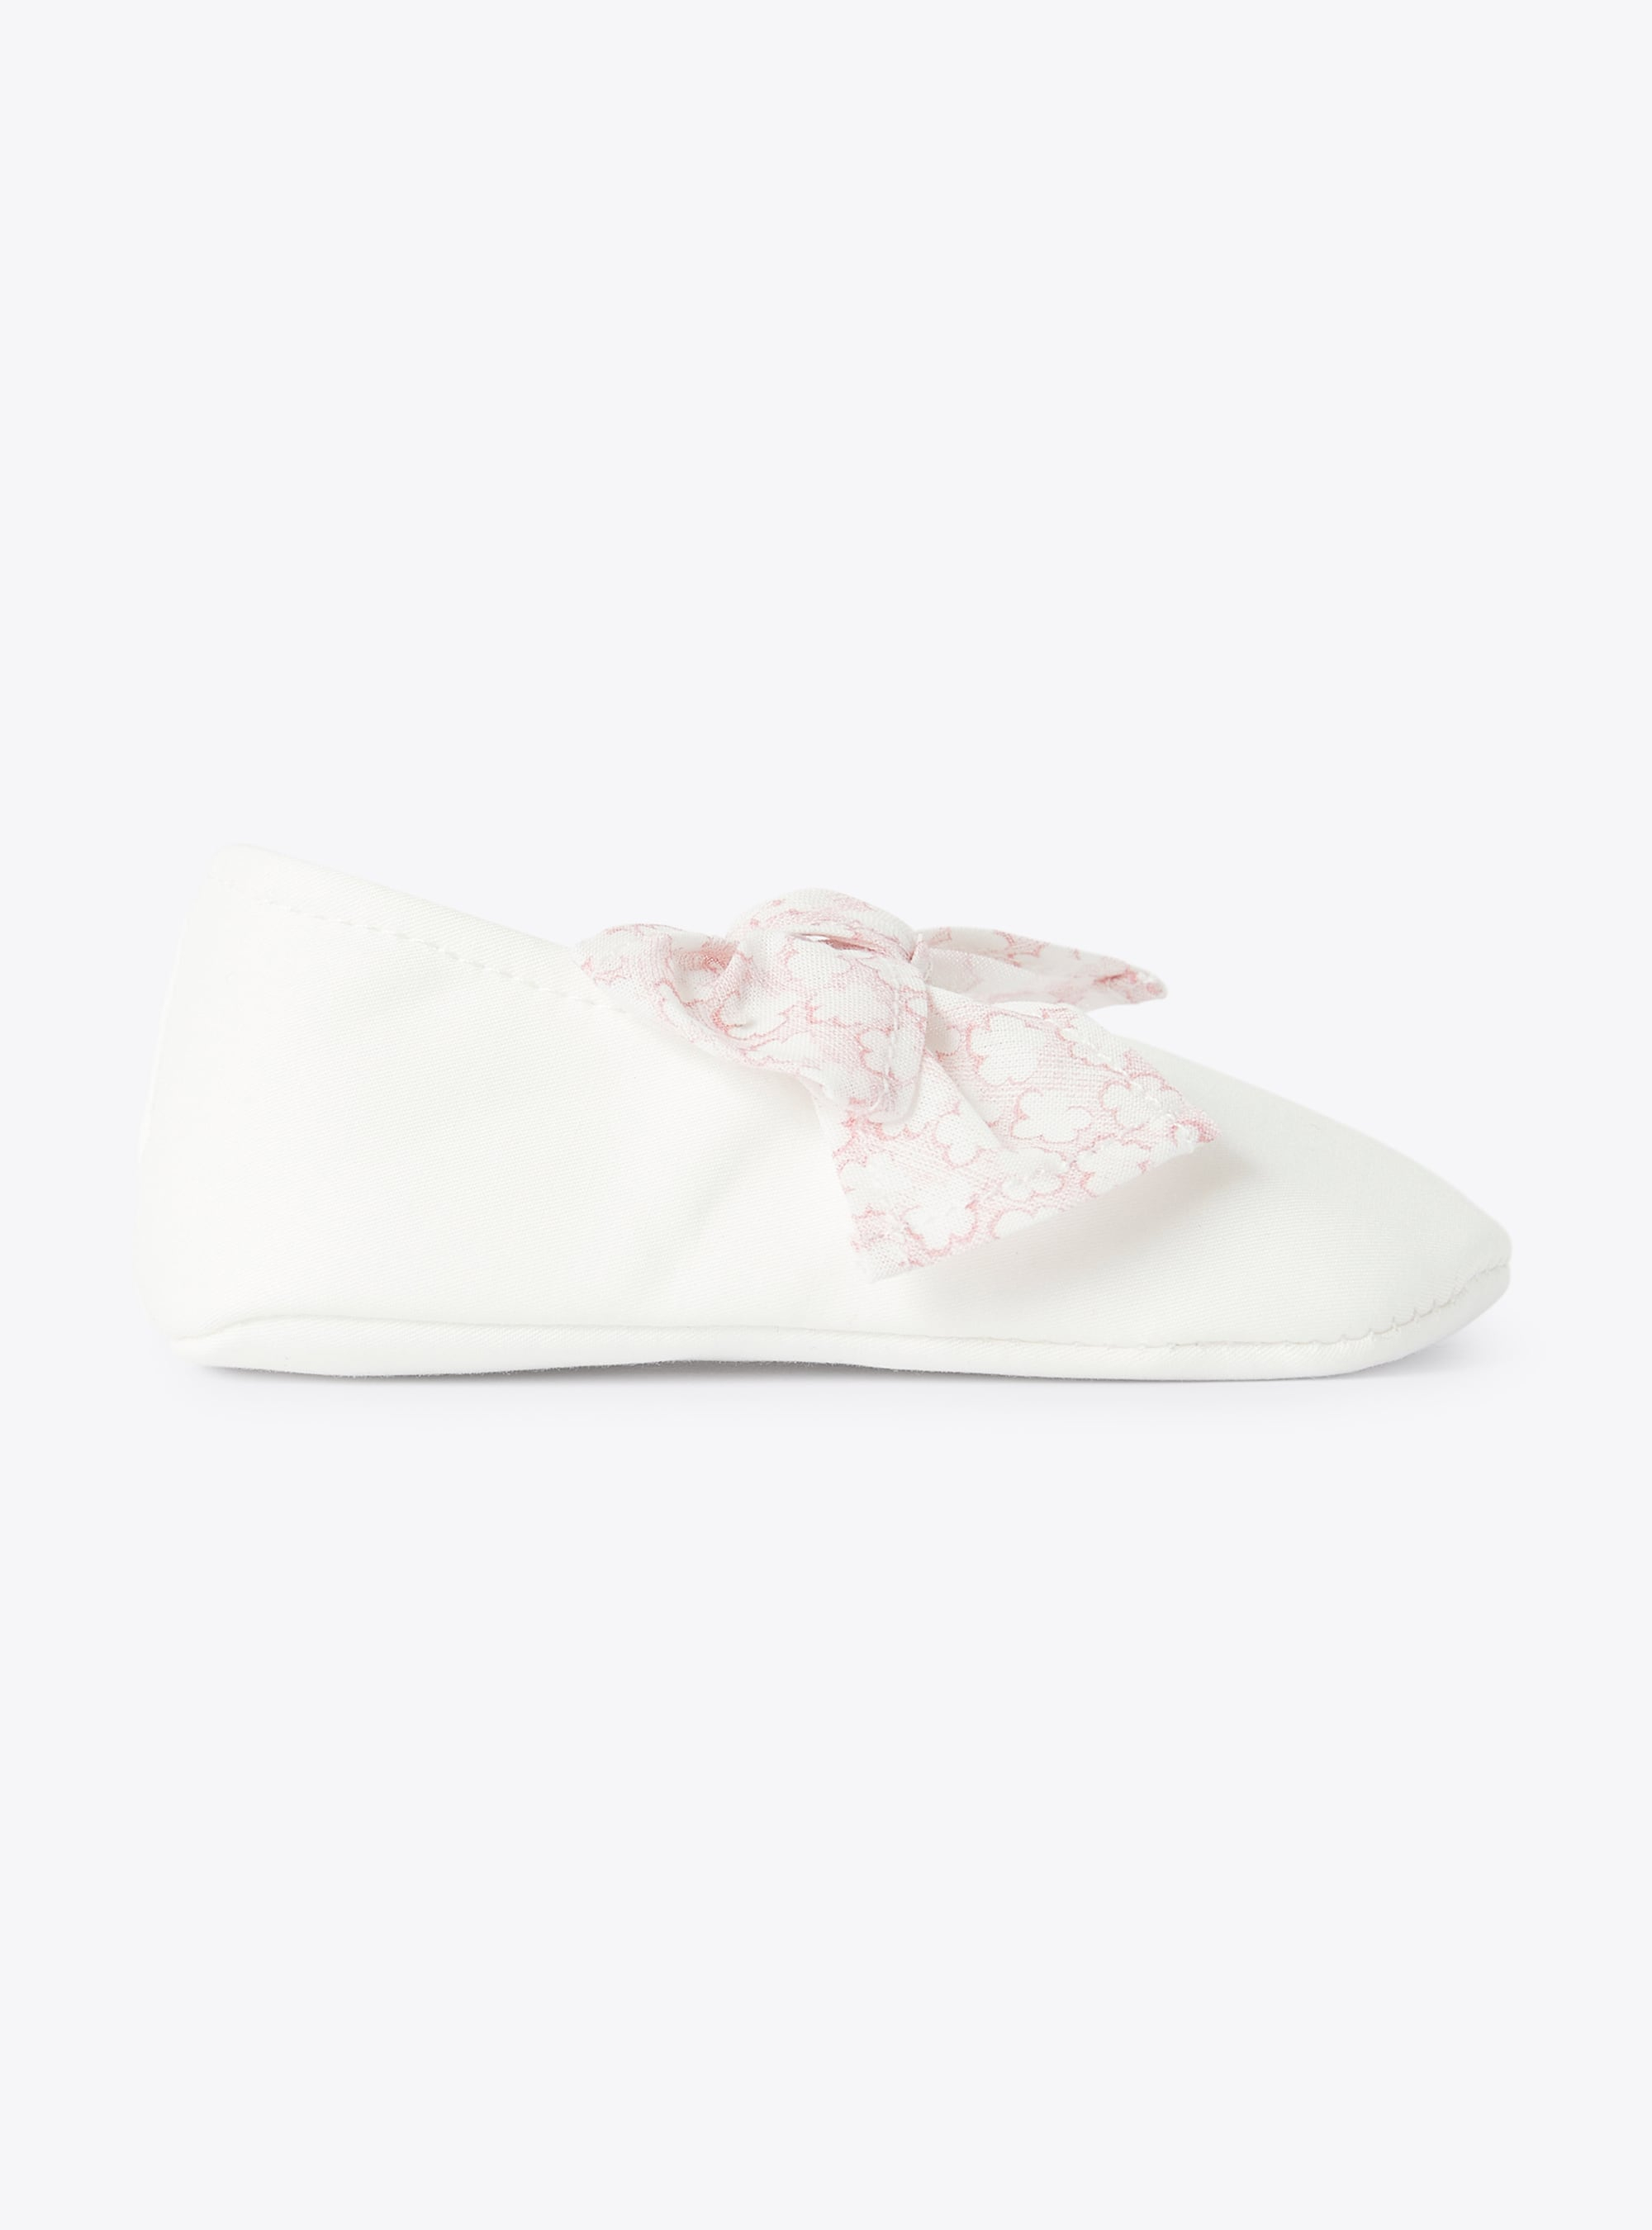 Shoe for baby girls with a floral-patterned bow detail - Pink | Il Gufo